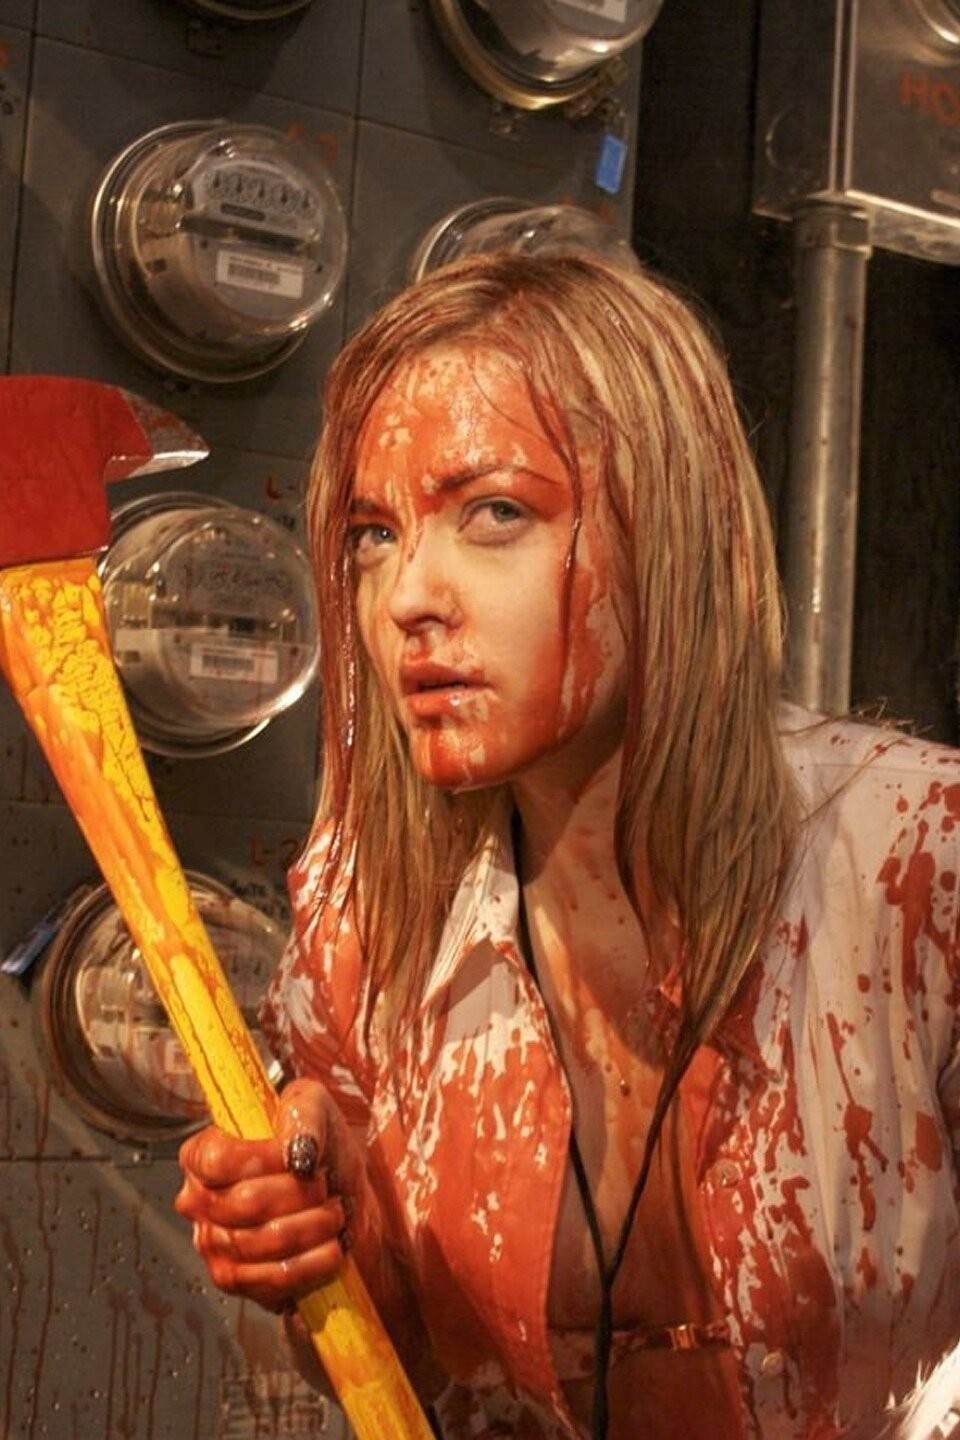 abhilash warrier recommends alexis texas bloodlust zombies pic